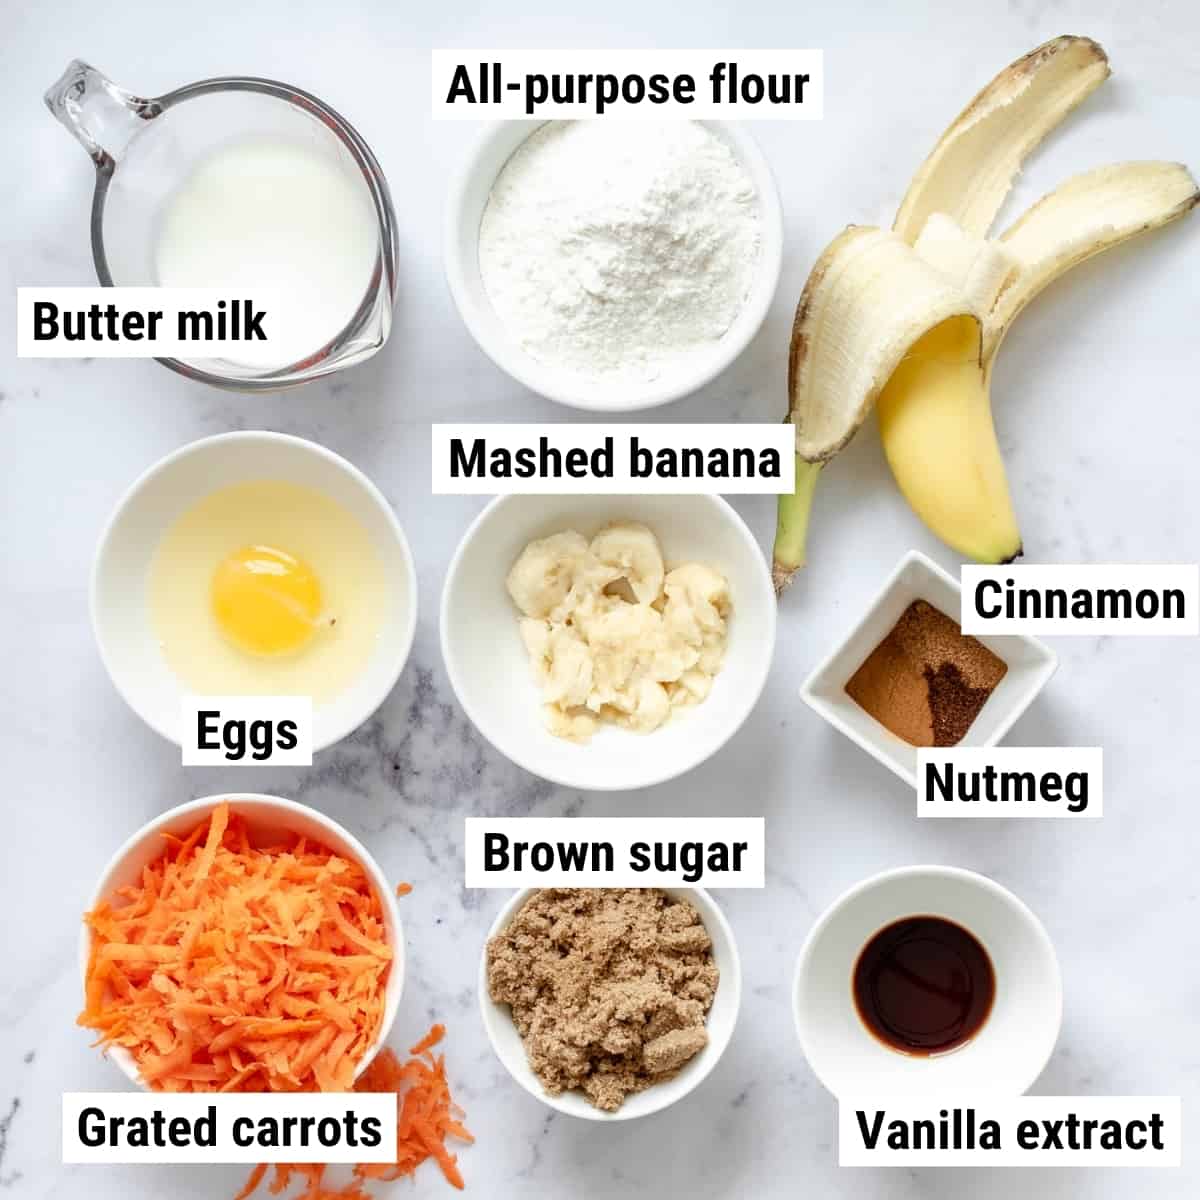 The ingredients needed to make carrot banana muffins.